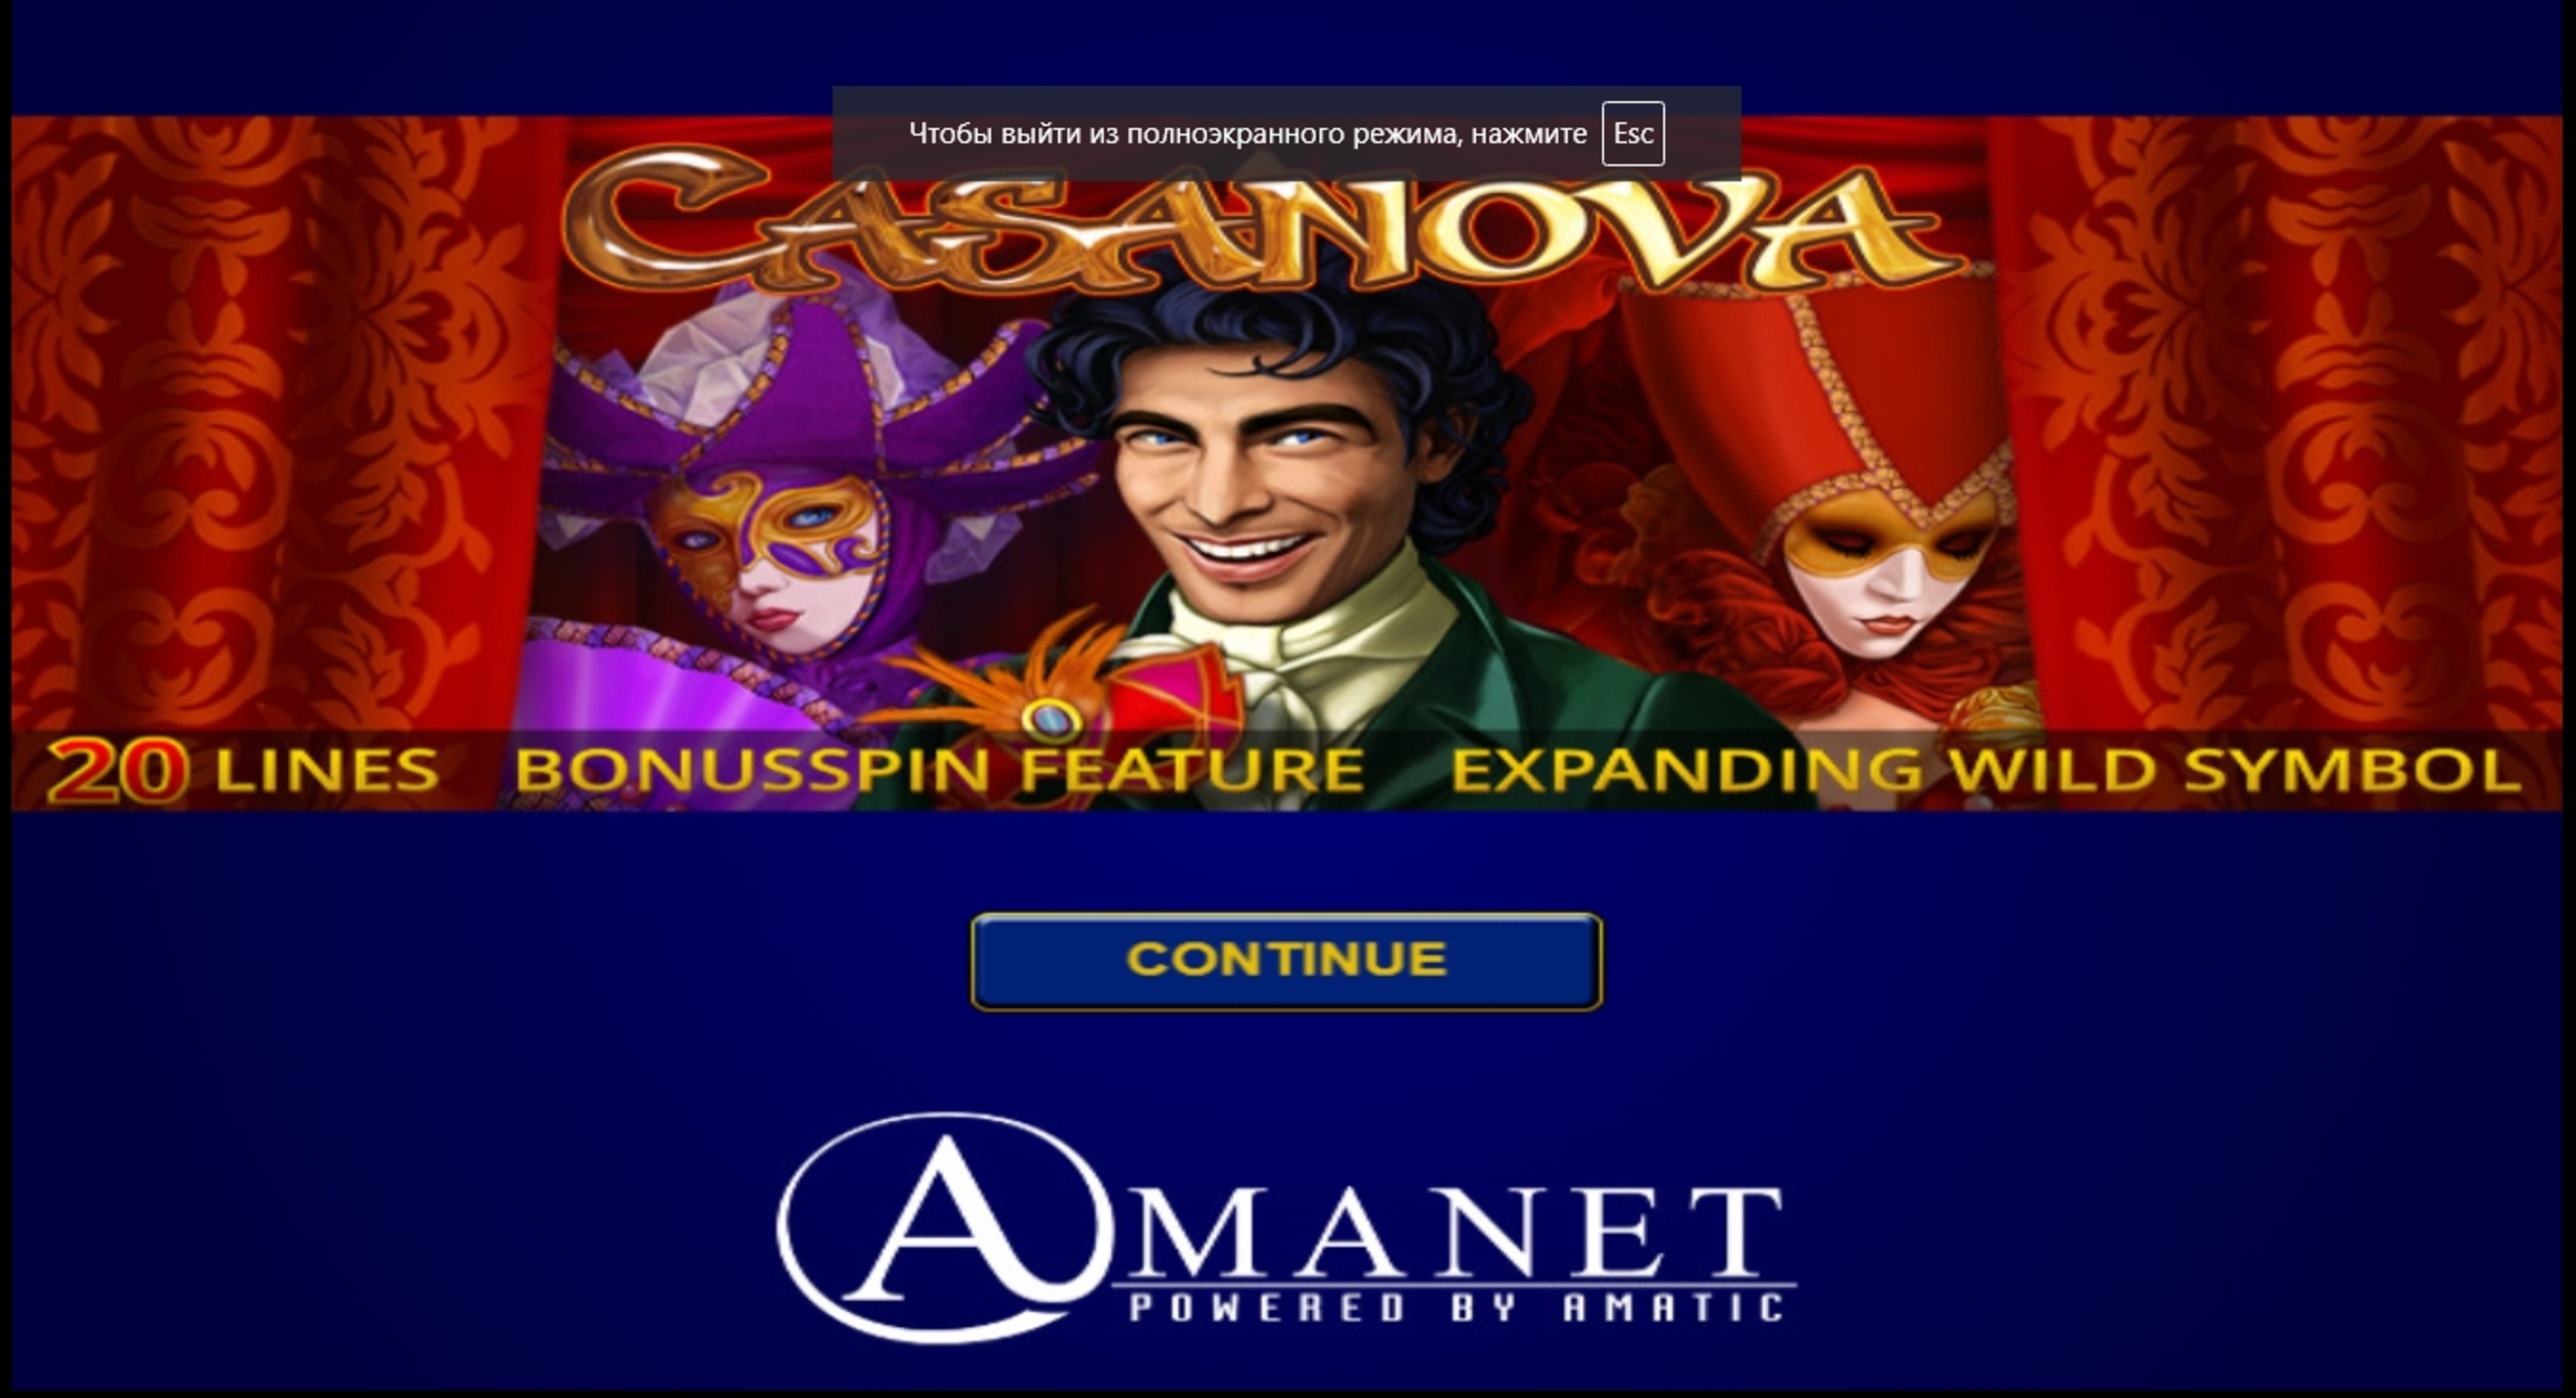 Play Casanova Free Casino Slot Game by Amatic Industries